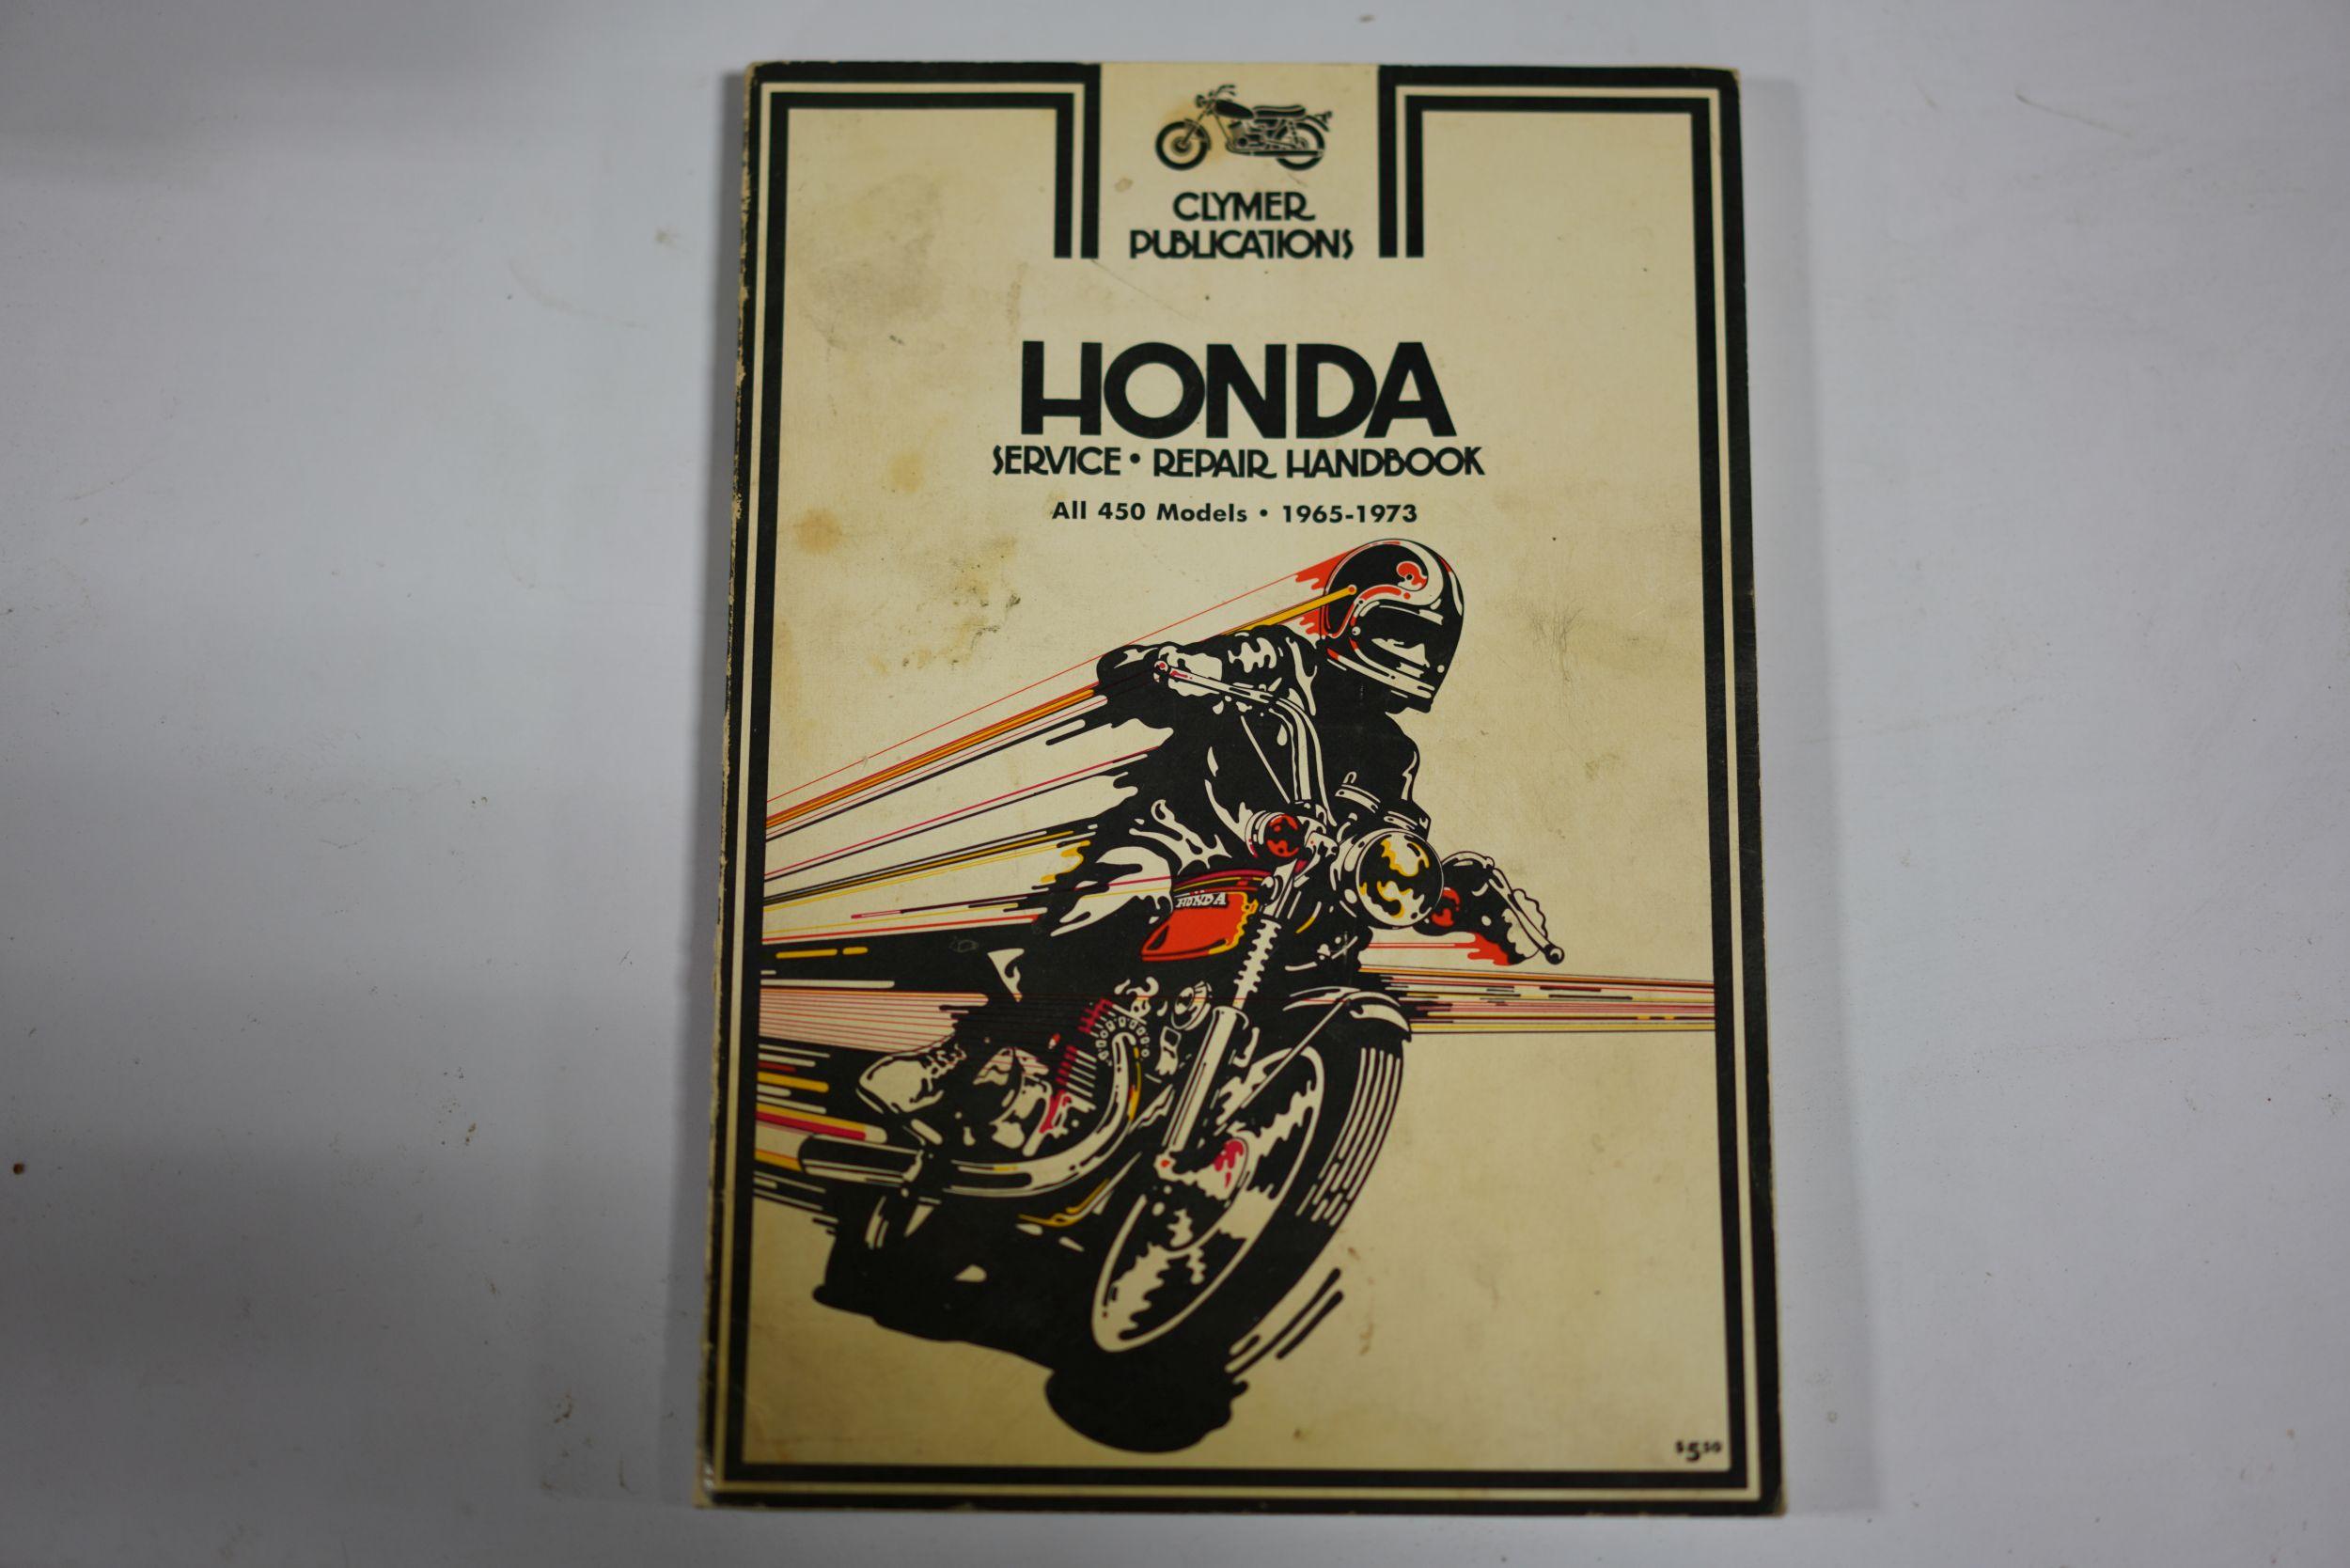 Vintage Motorcycle manuals/books